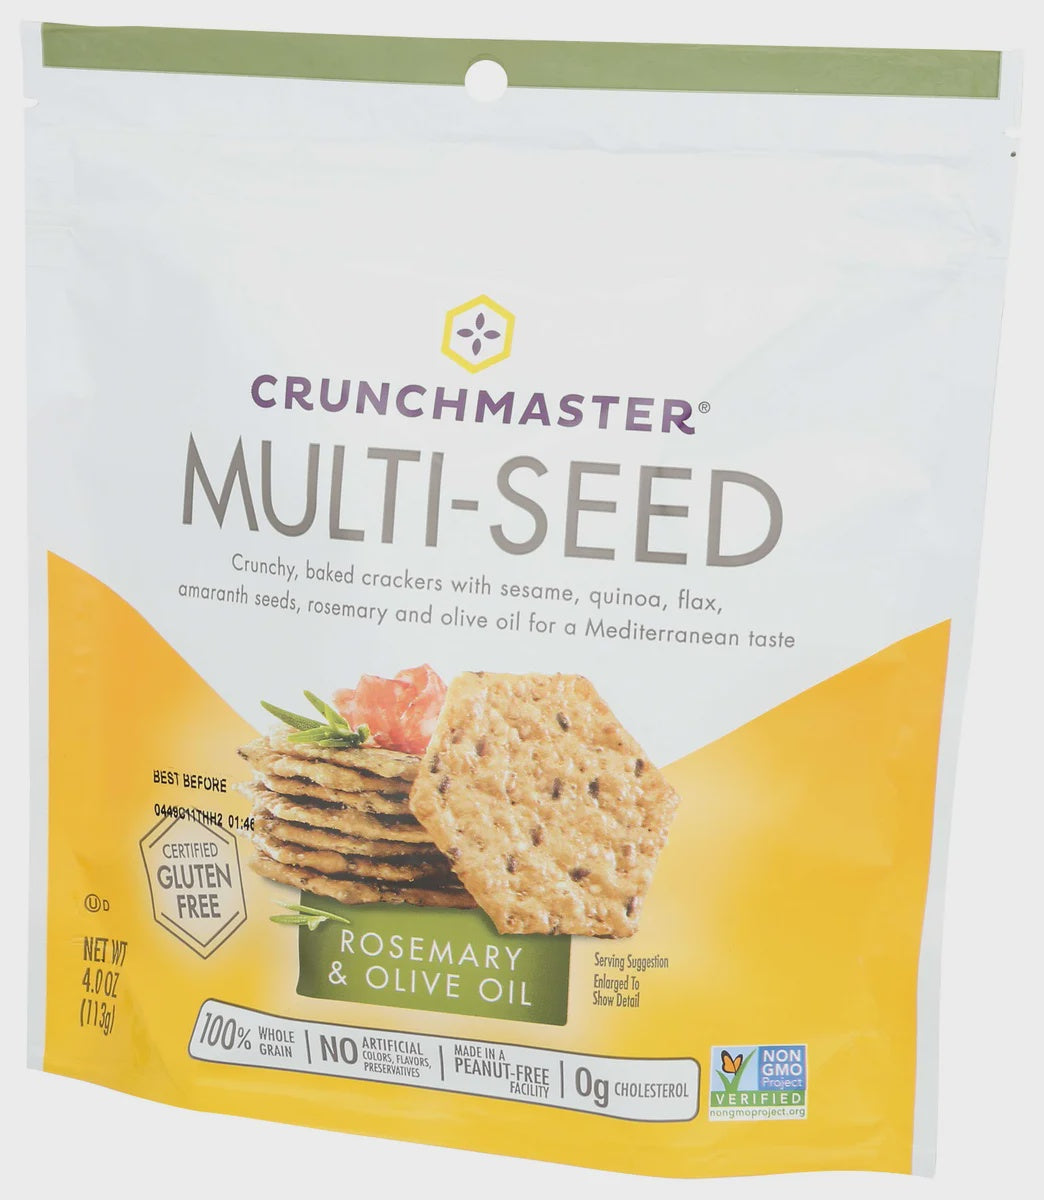 Crunchmaster Rosemary & Olive Oil Multiseed Crackers 4oz